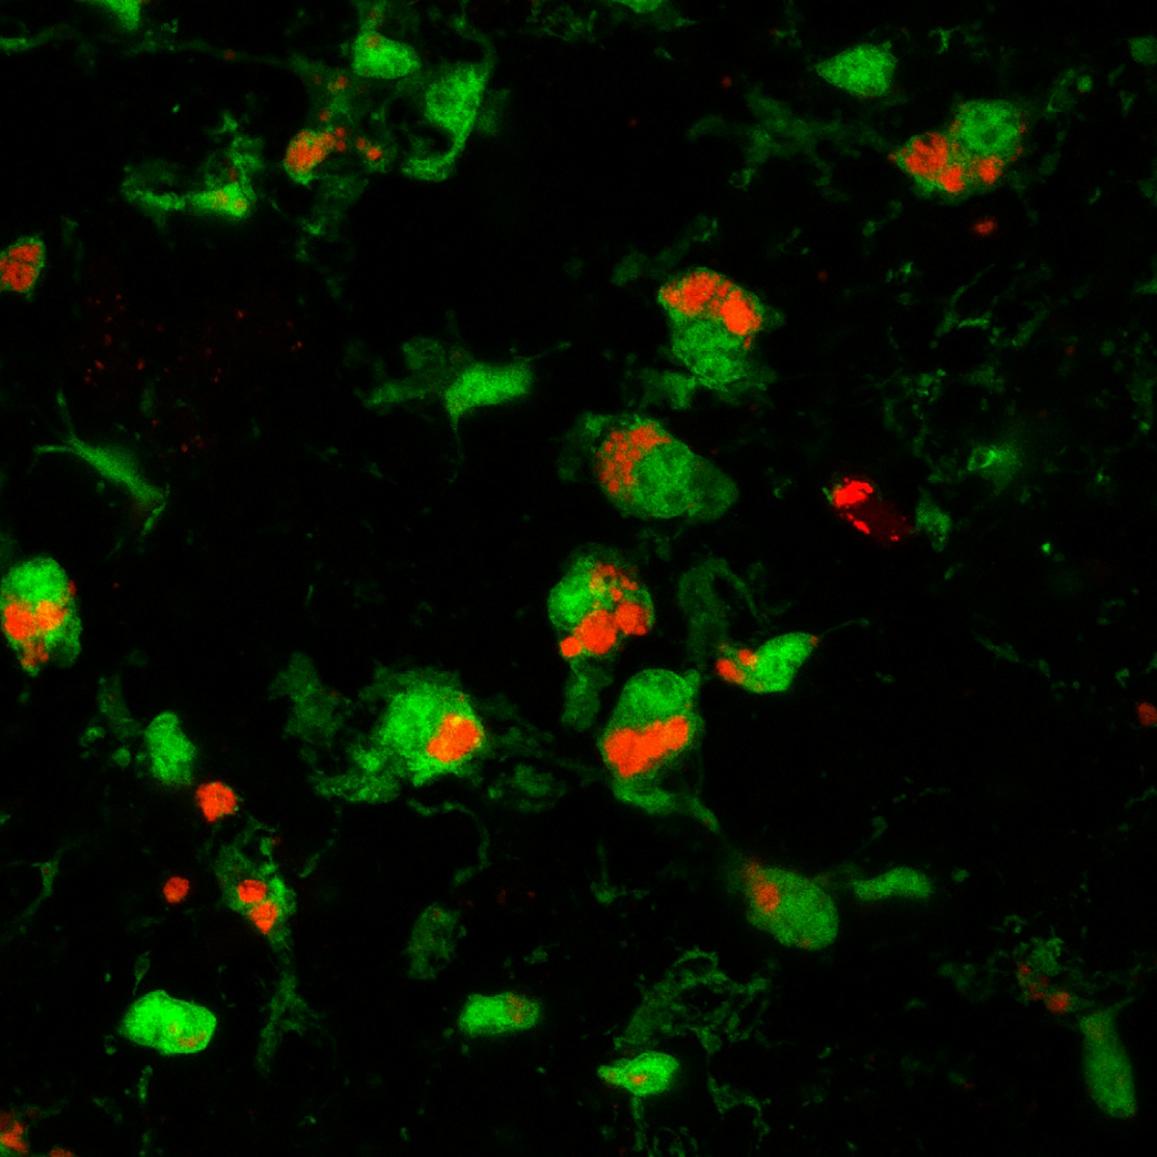 Microglial cells (green) engulfing and eliminating prion-damaged photoreceptors (red)